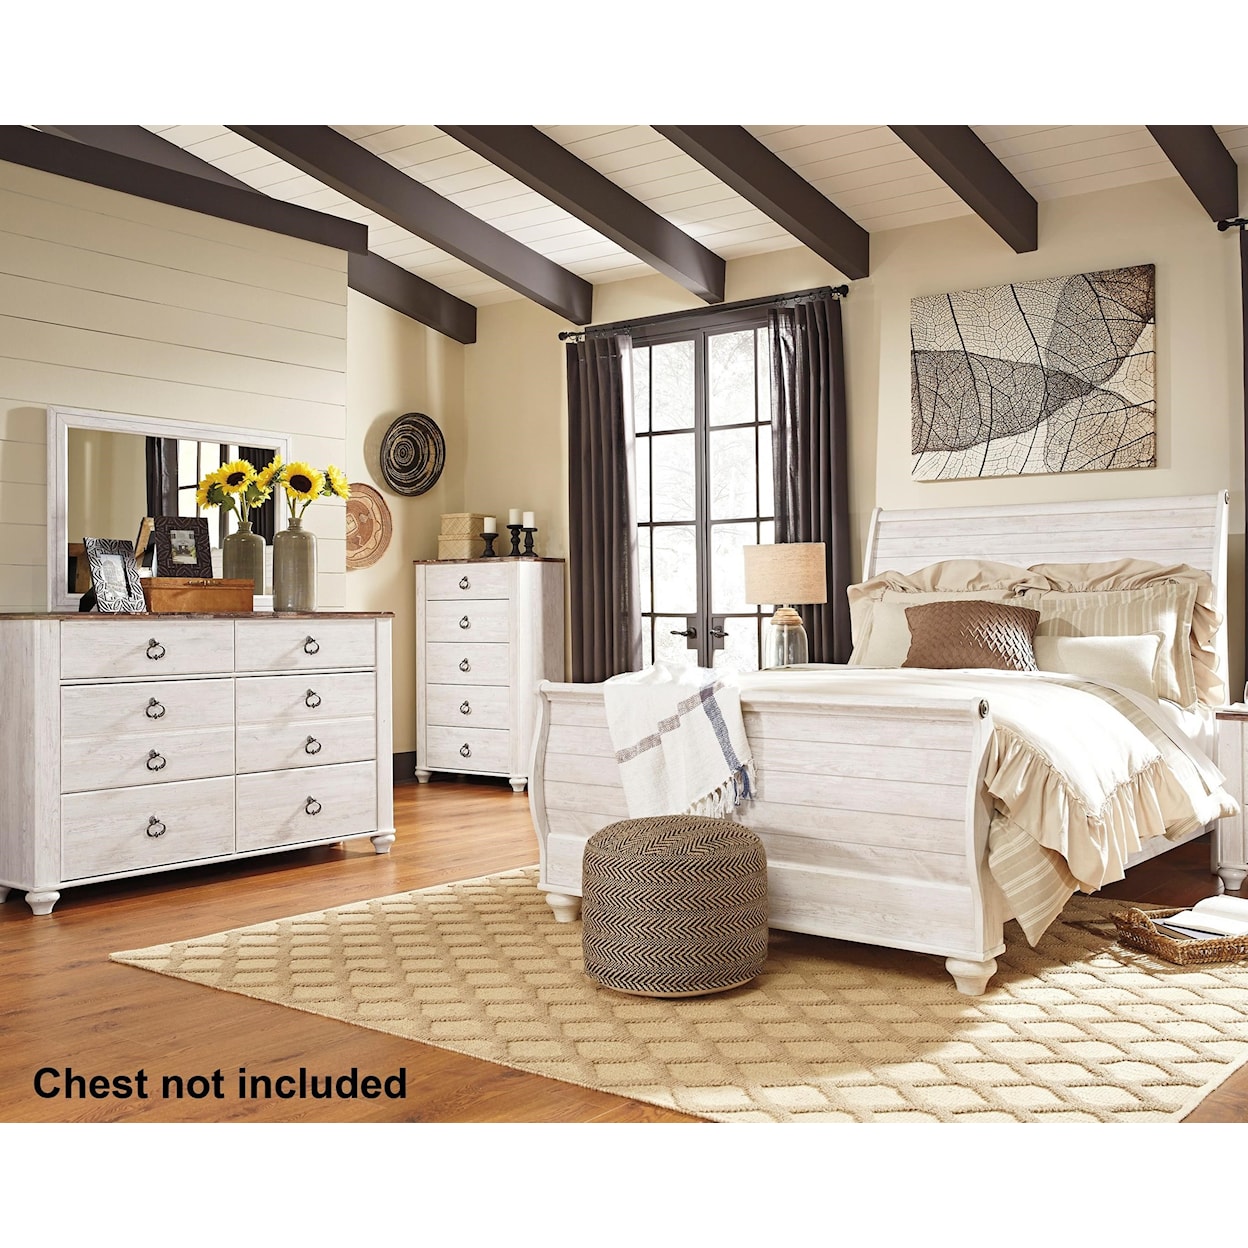 Benchcraft Willowton Queen Bedroom Group